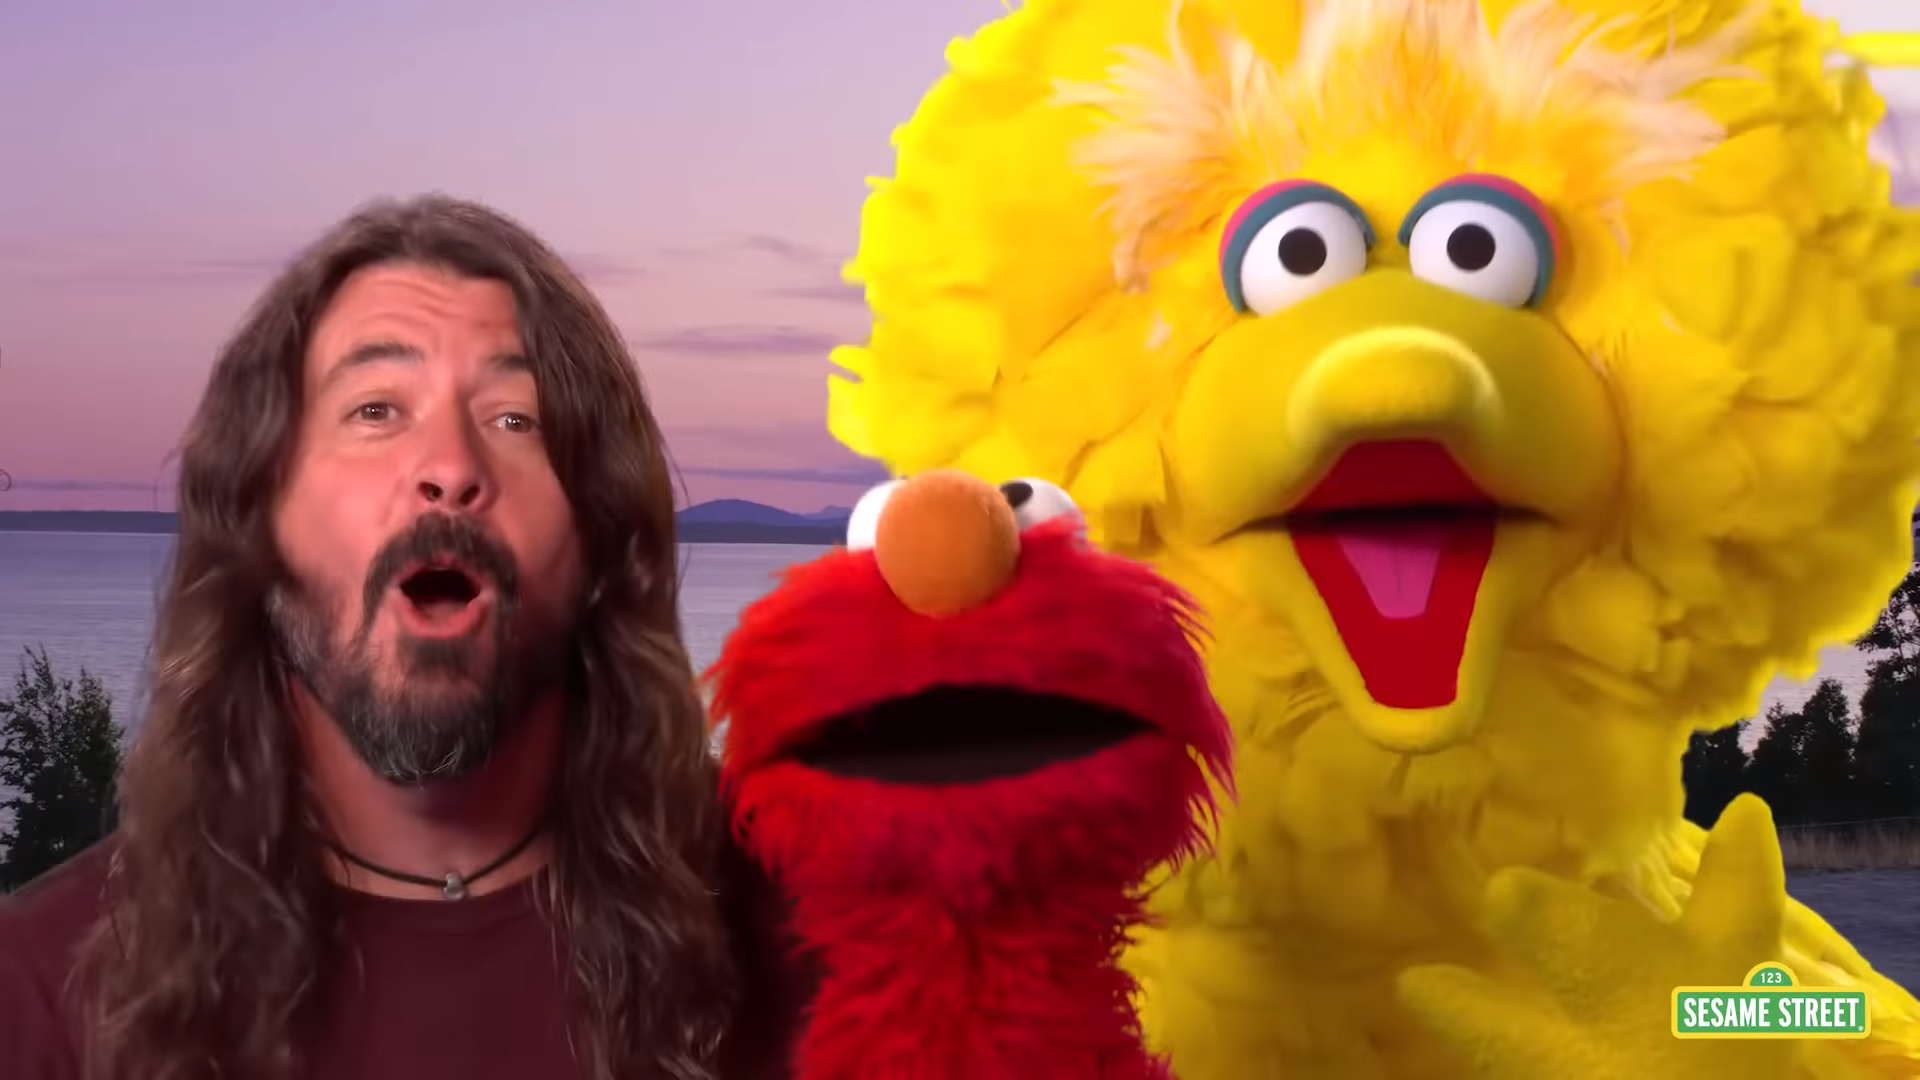 From Nirvana to Sesame Street: Here’s Dave Grohl now (video)